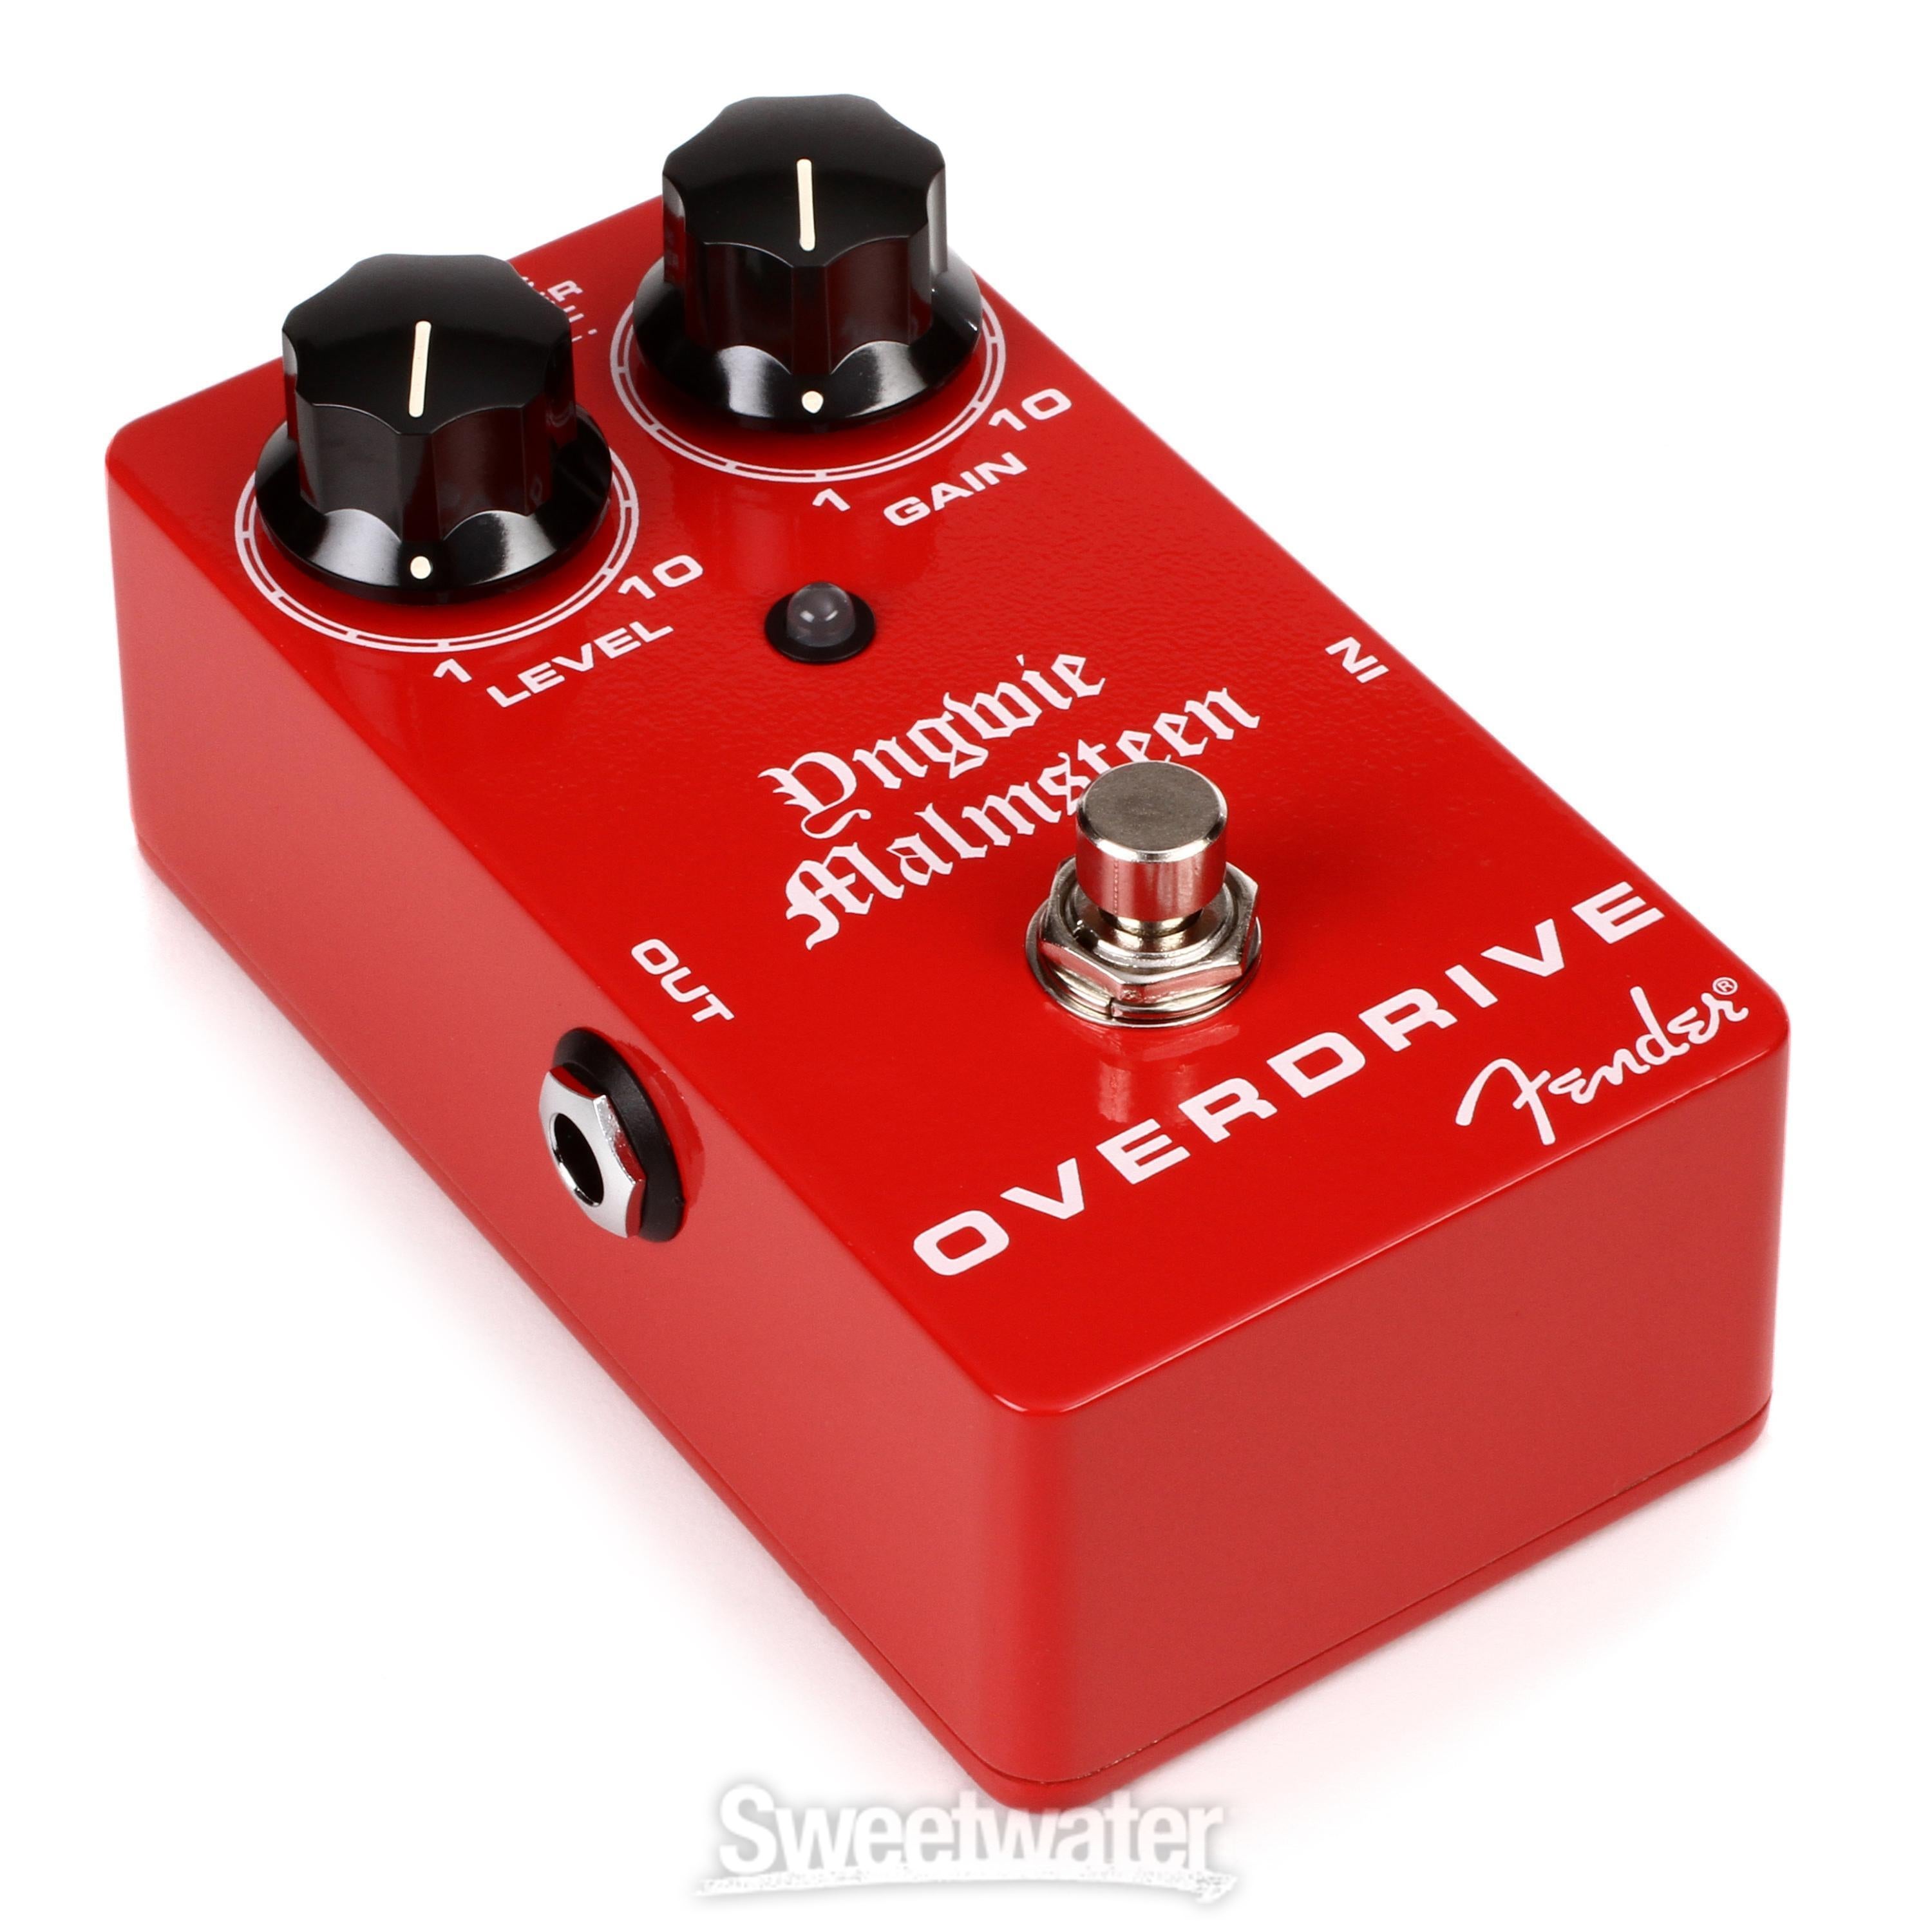 Fender Yngwie Malmsteen Overdrive Pedal | Sweetwater